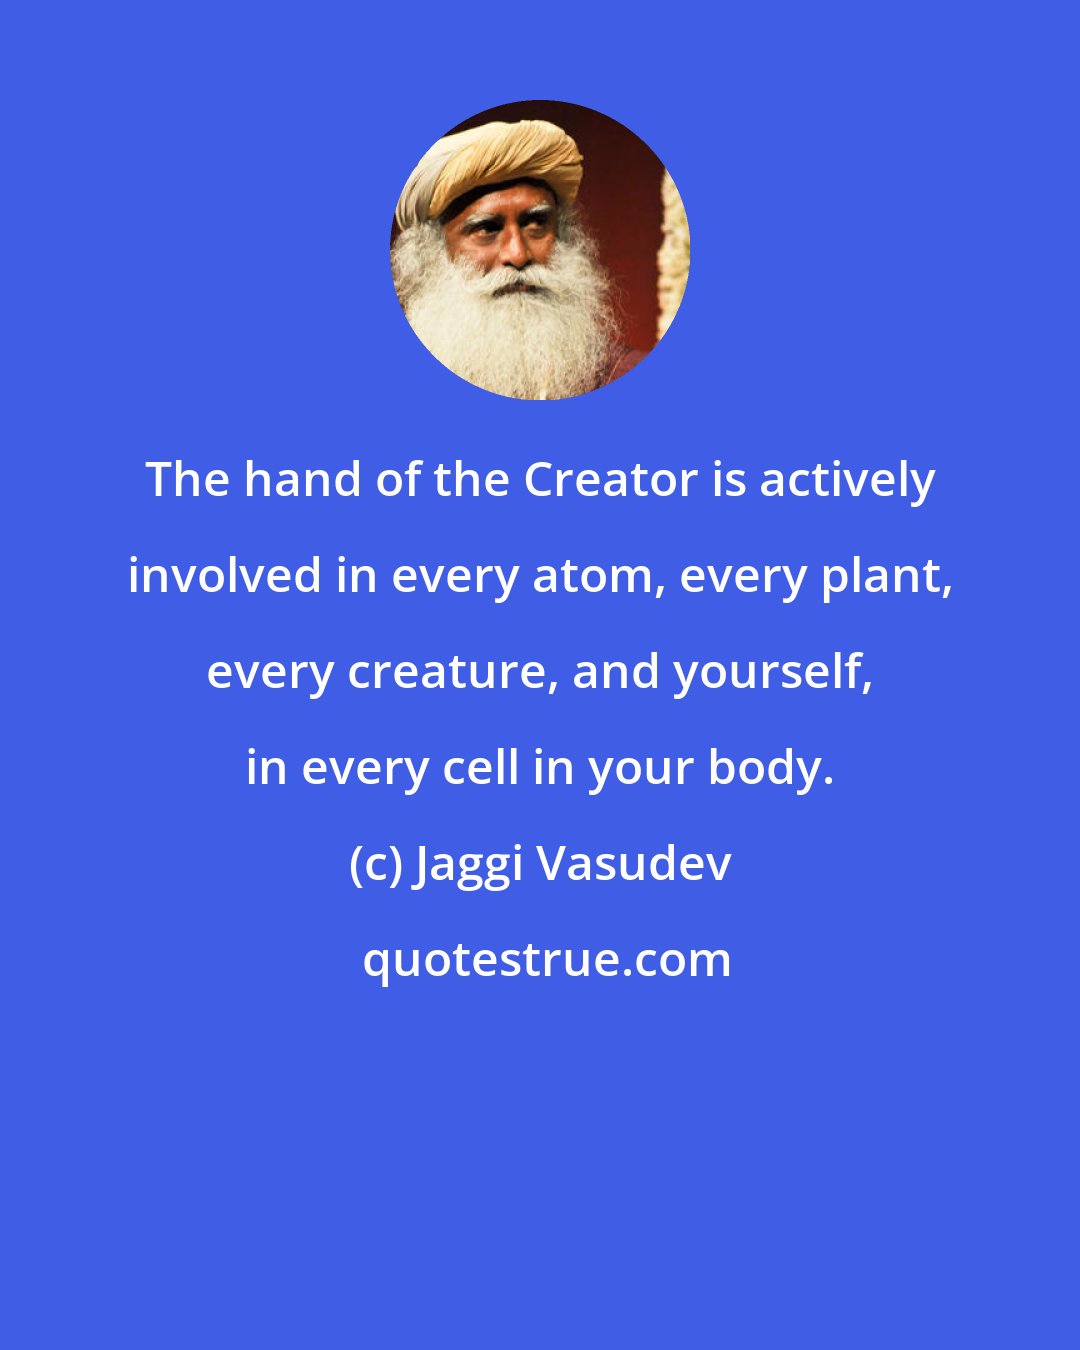 Jaggi Vasudev: The hand of the Creator is actively involved in every atom, every plant, every creature, and yourself, in every cell in your body.